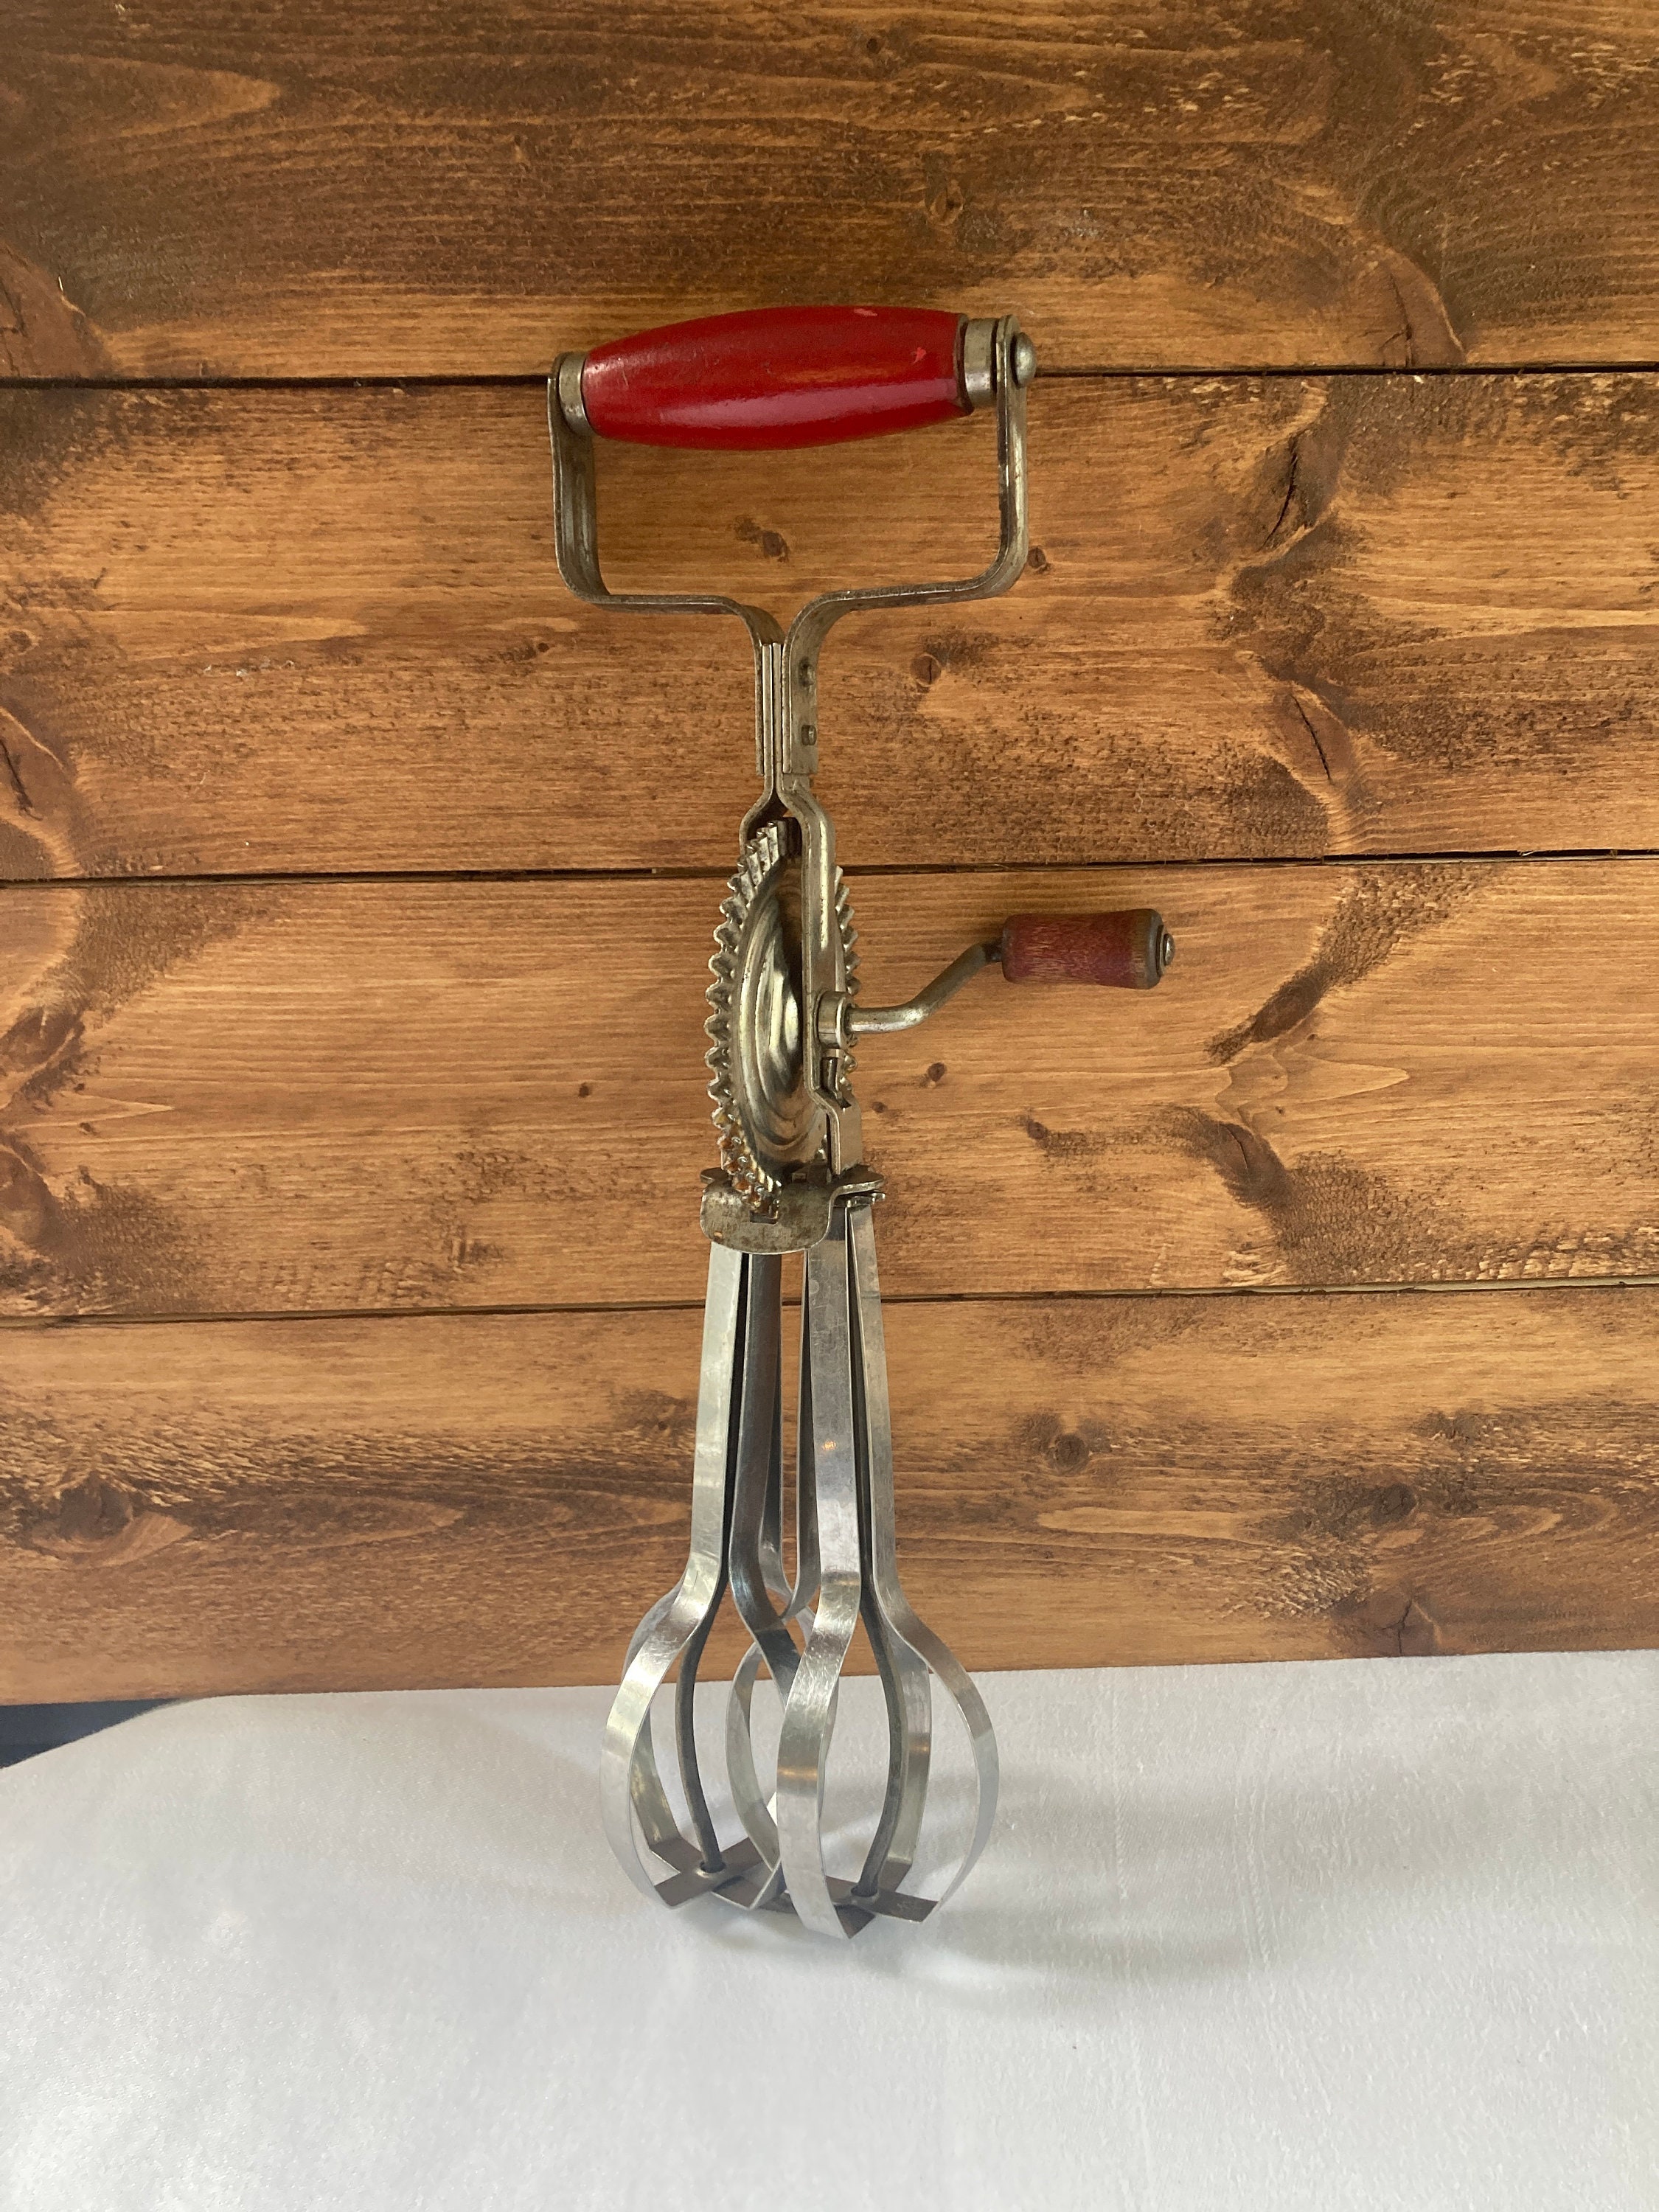 Vintage Red Handle Kitchen Tools, Androck Rotary Egg Beater, Potato Masher,  Strainer, Long Handle Fork, Farmhouse or Cabin Kitchen Decor 